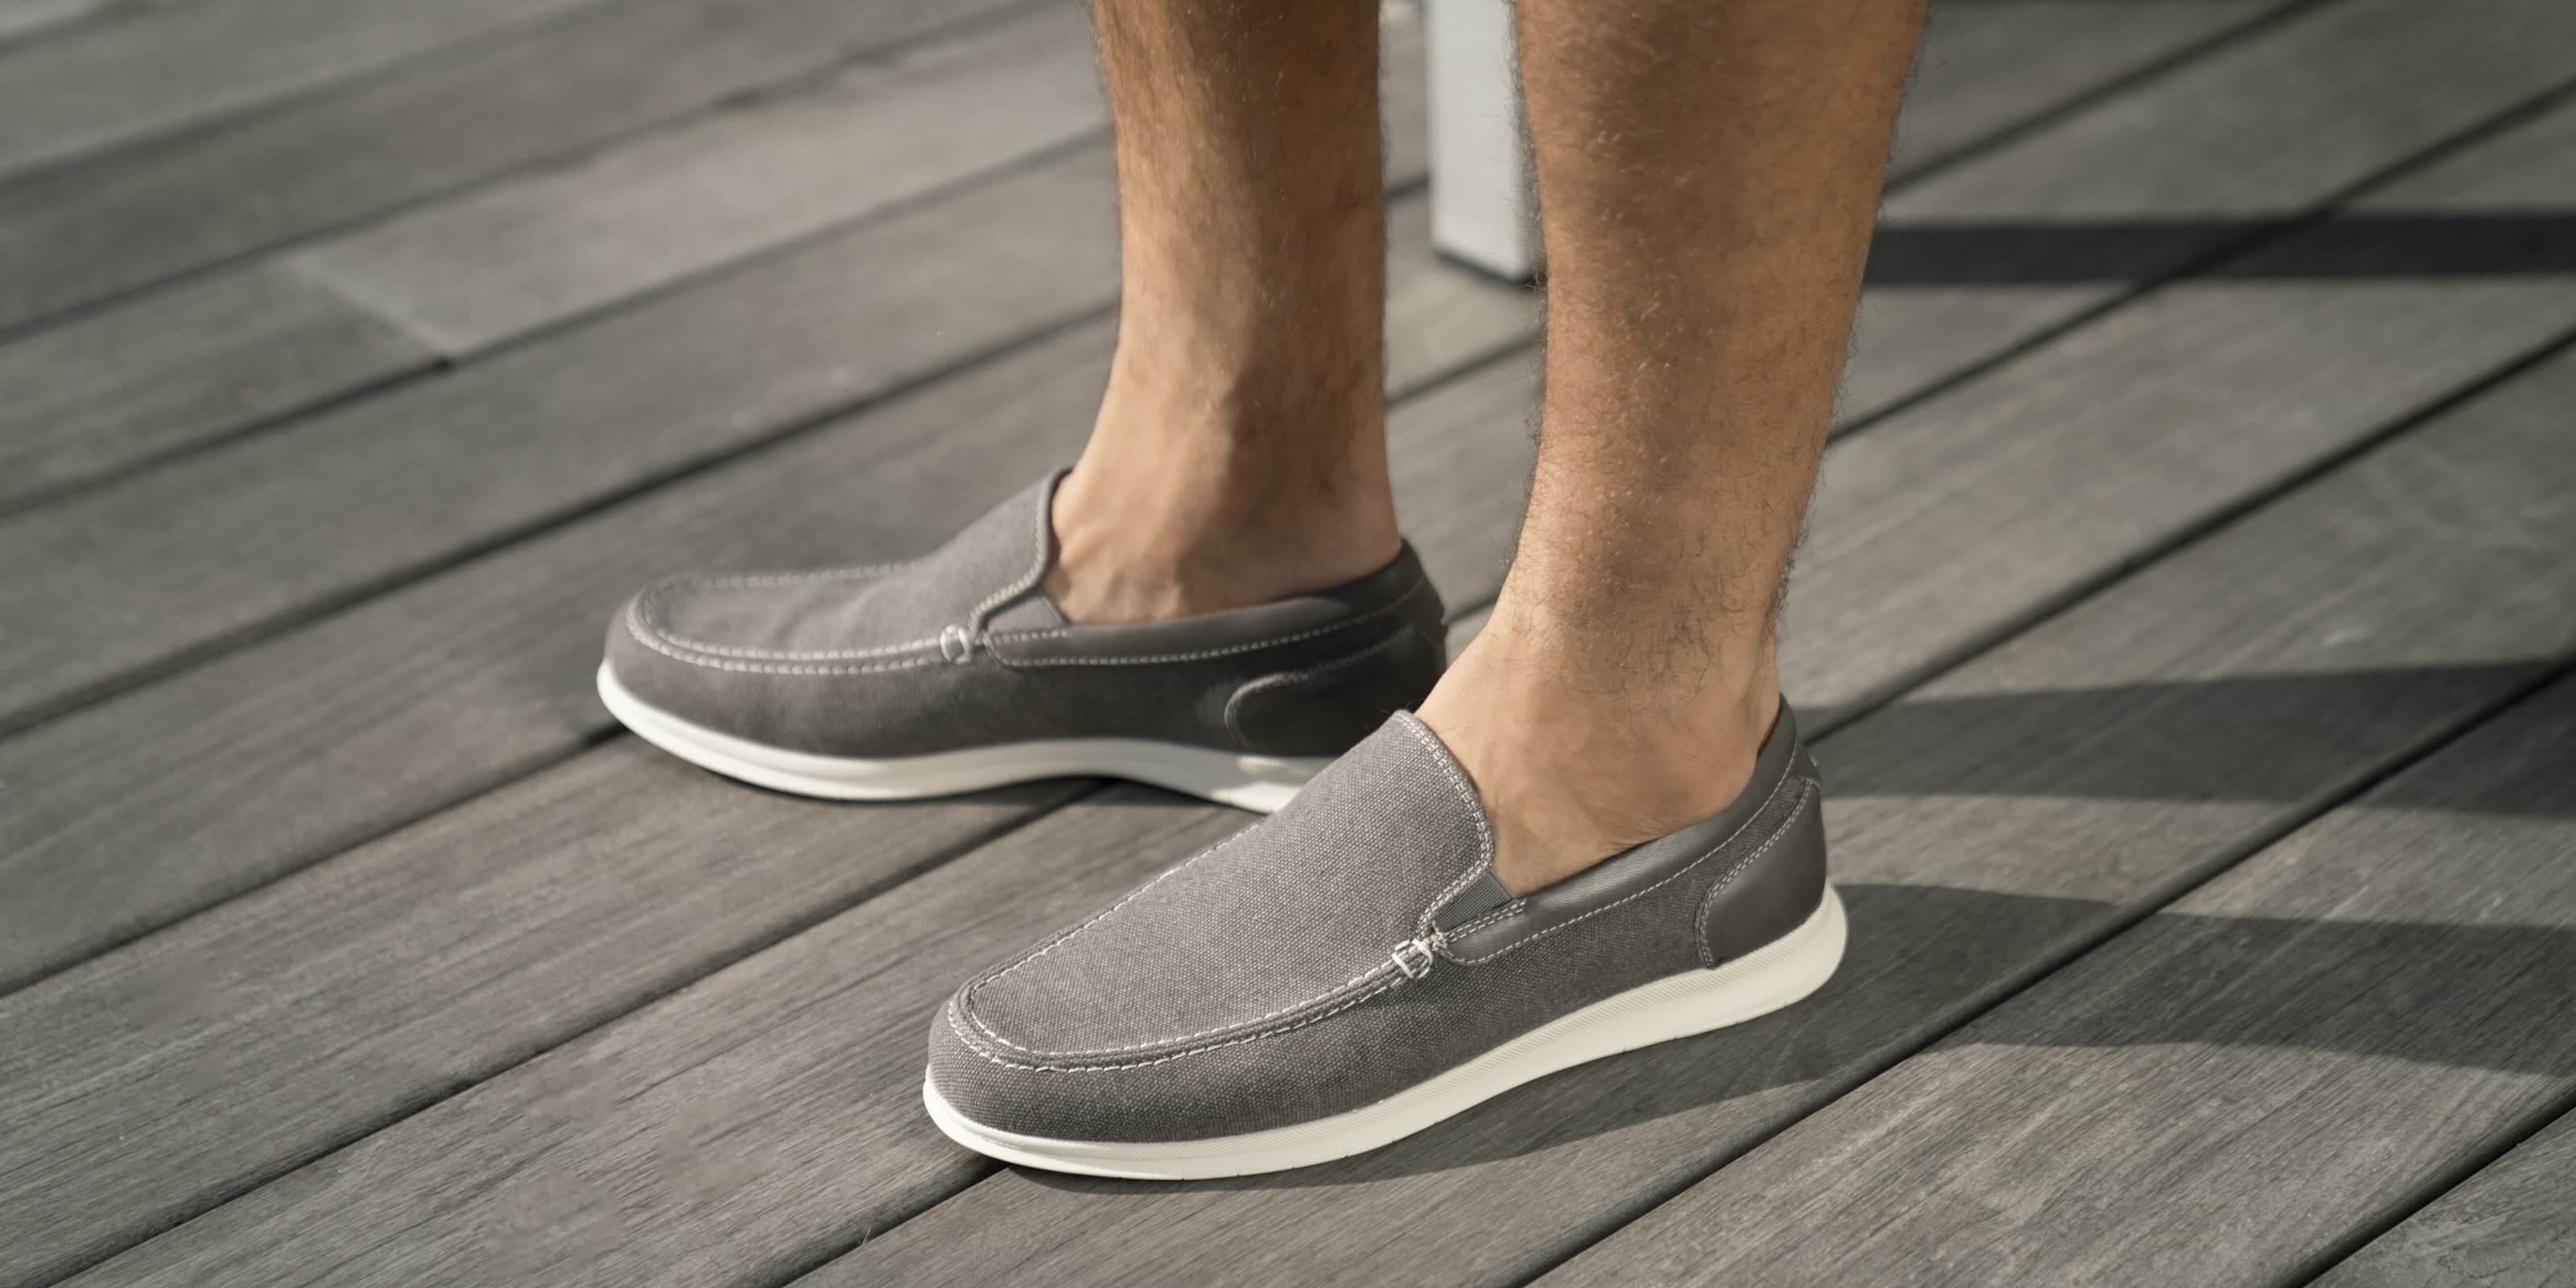 Men's Casual Shoes Online: Low Price Offer on Casual Shoes for Men - AJIO